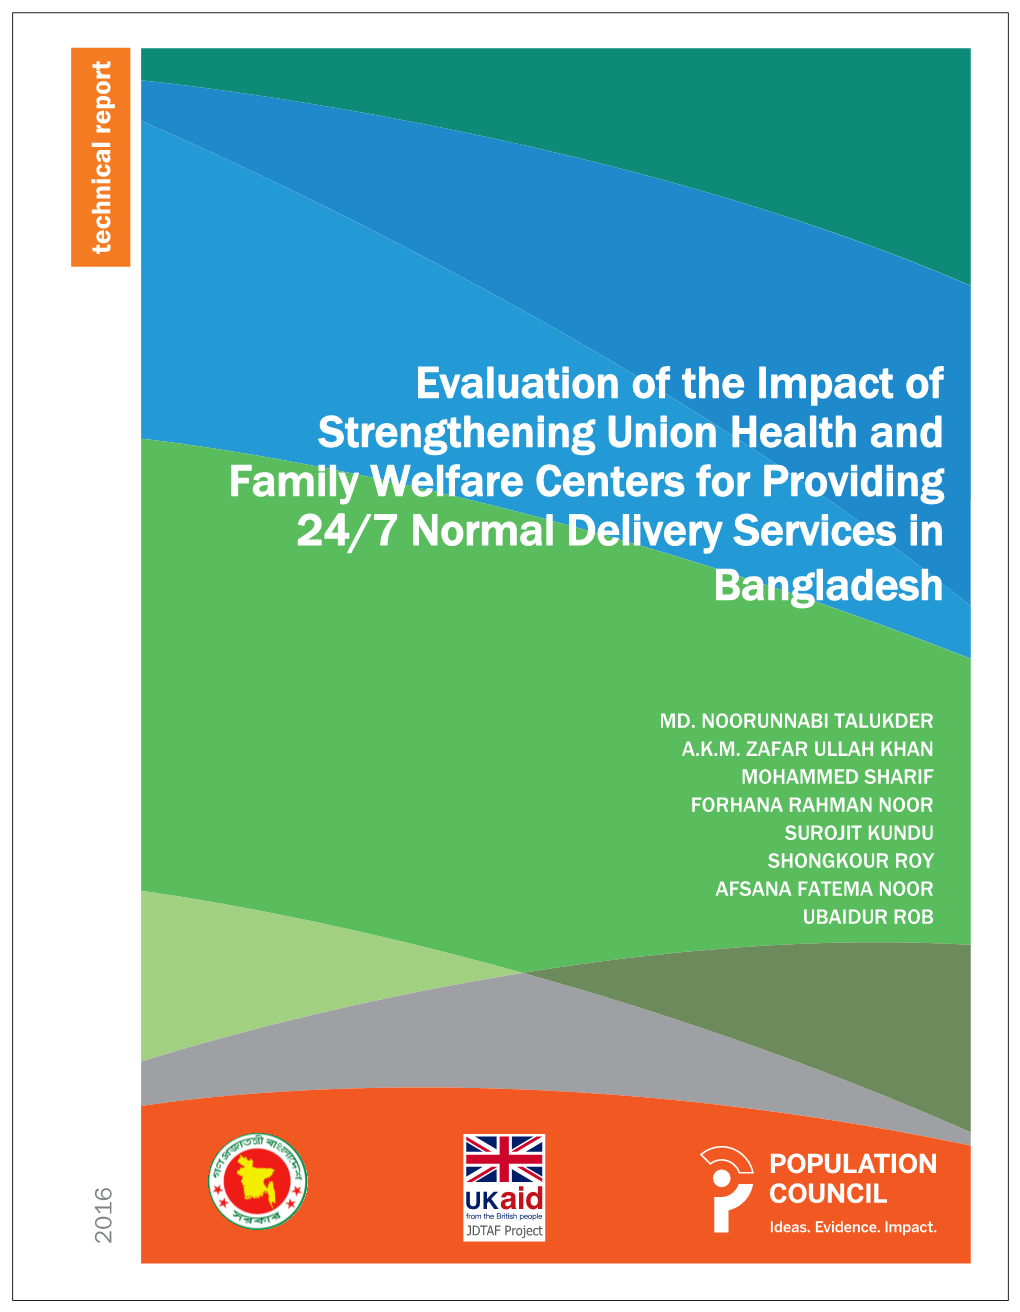 Evaluation of the Impact of Strengthening Union Health and Family Welfare Centers for Providing 24/7 Normal Delivery Services in Bangladesh